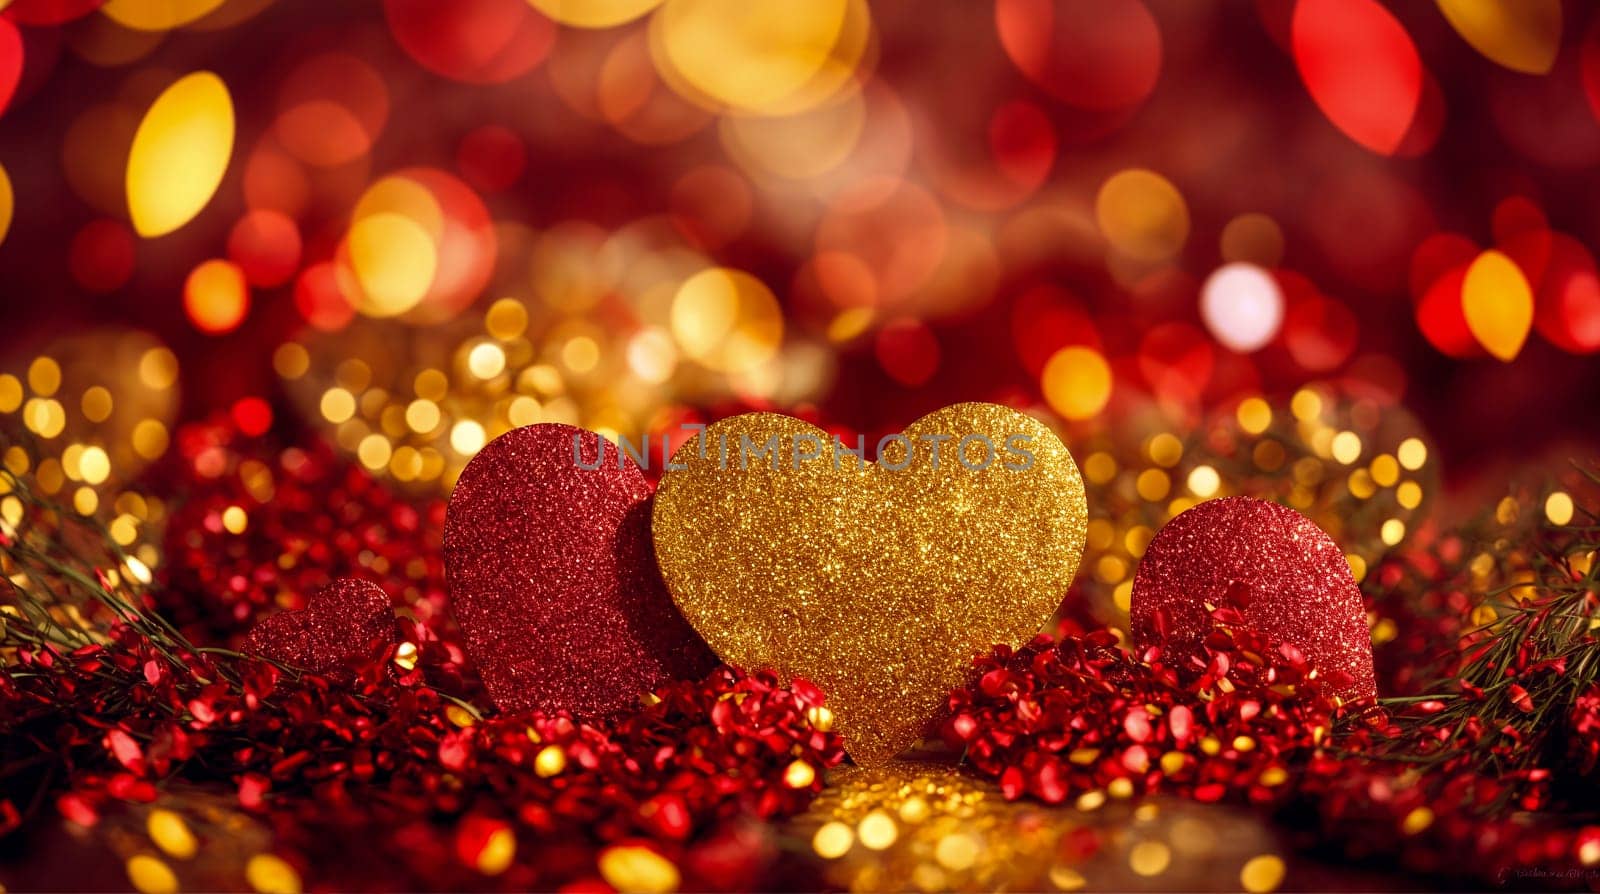 Glistening Hearts and Festive Lights Backdrop - Valentine-s day concept by chrisroll